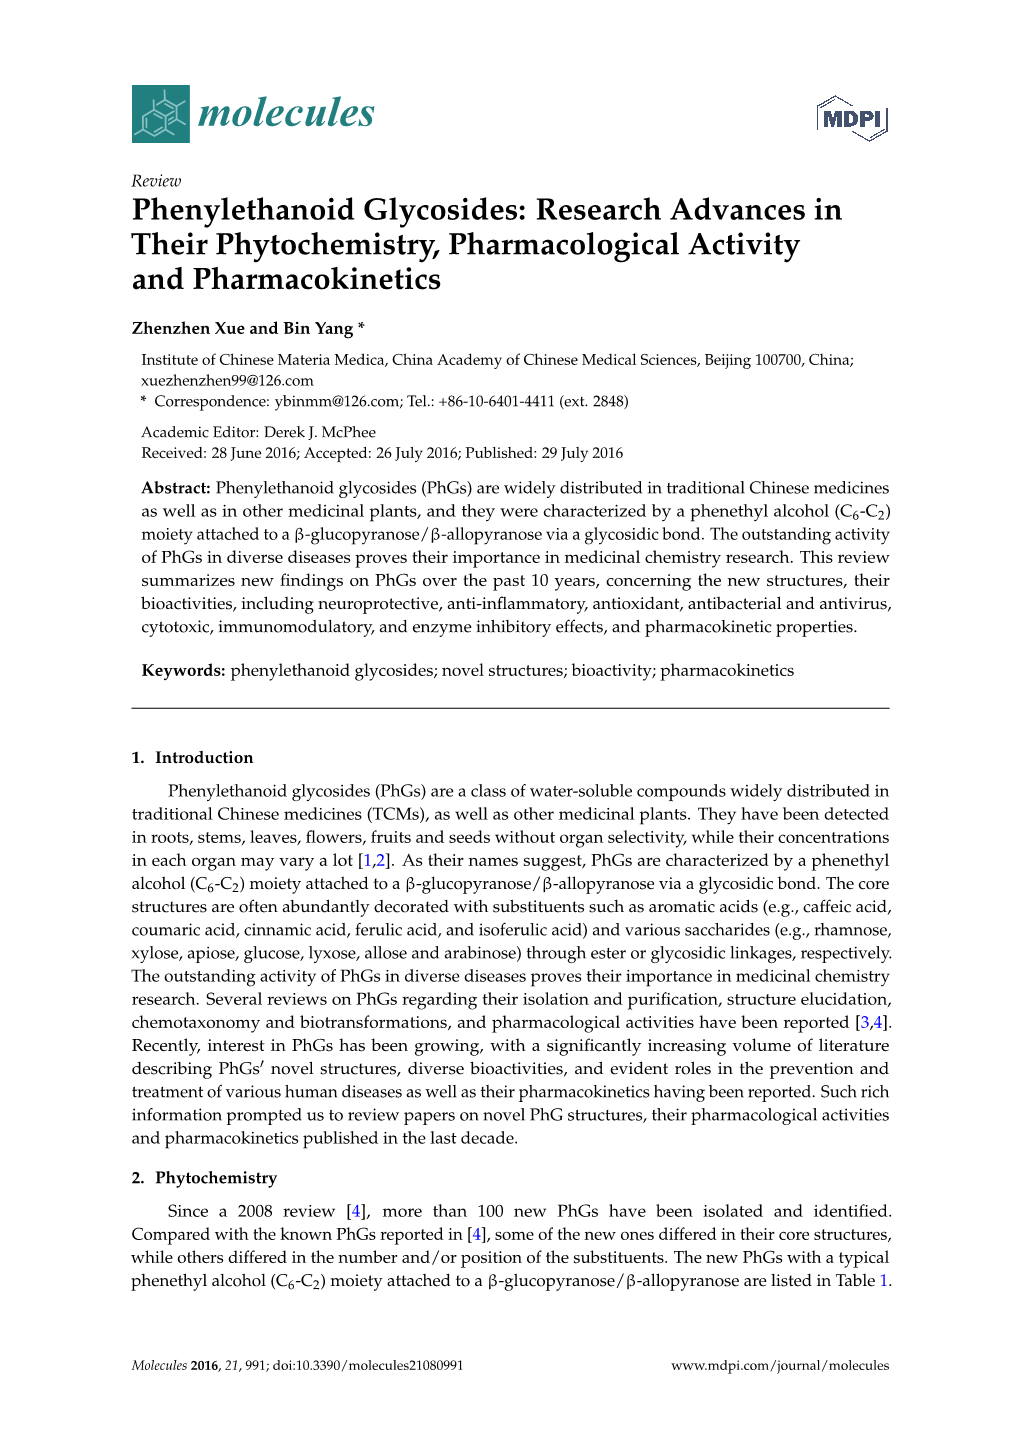 Phenylethanoid Glycosides: Research Advances in Their Phytochemistry, Pharmacological Activity and Pharmacokinetics